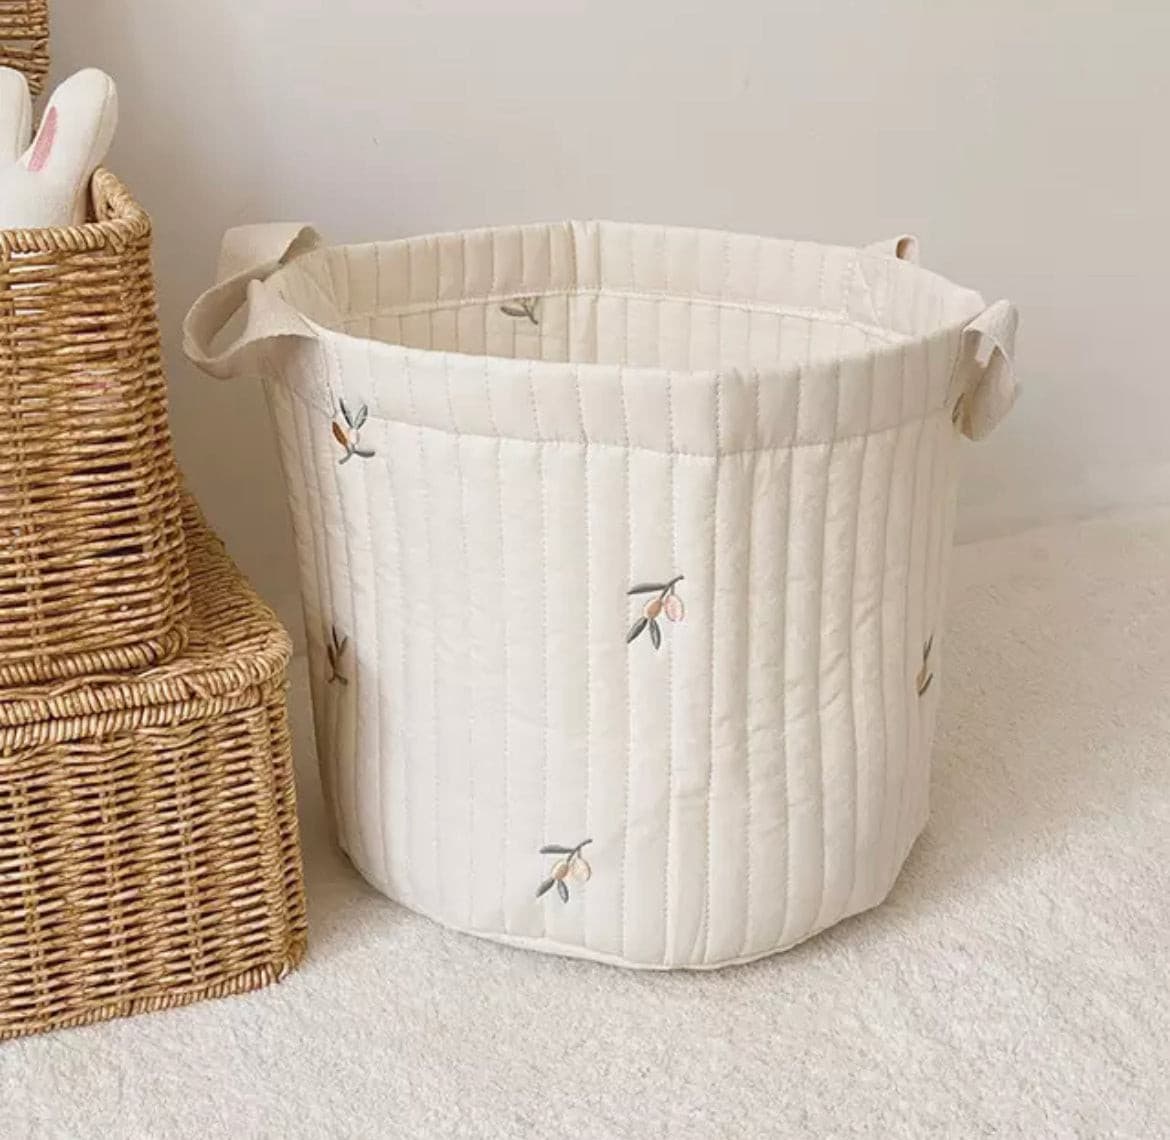 Baby Room Baskets - Teddy & Olive.